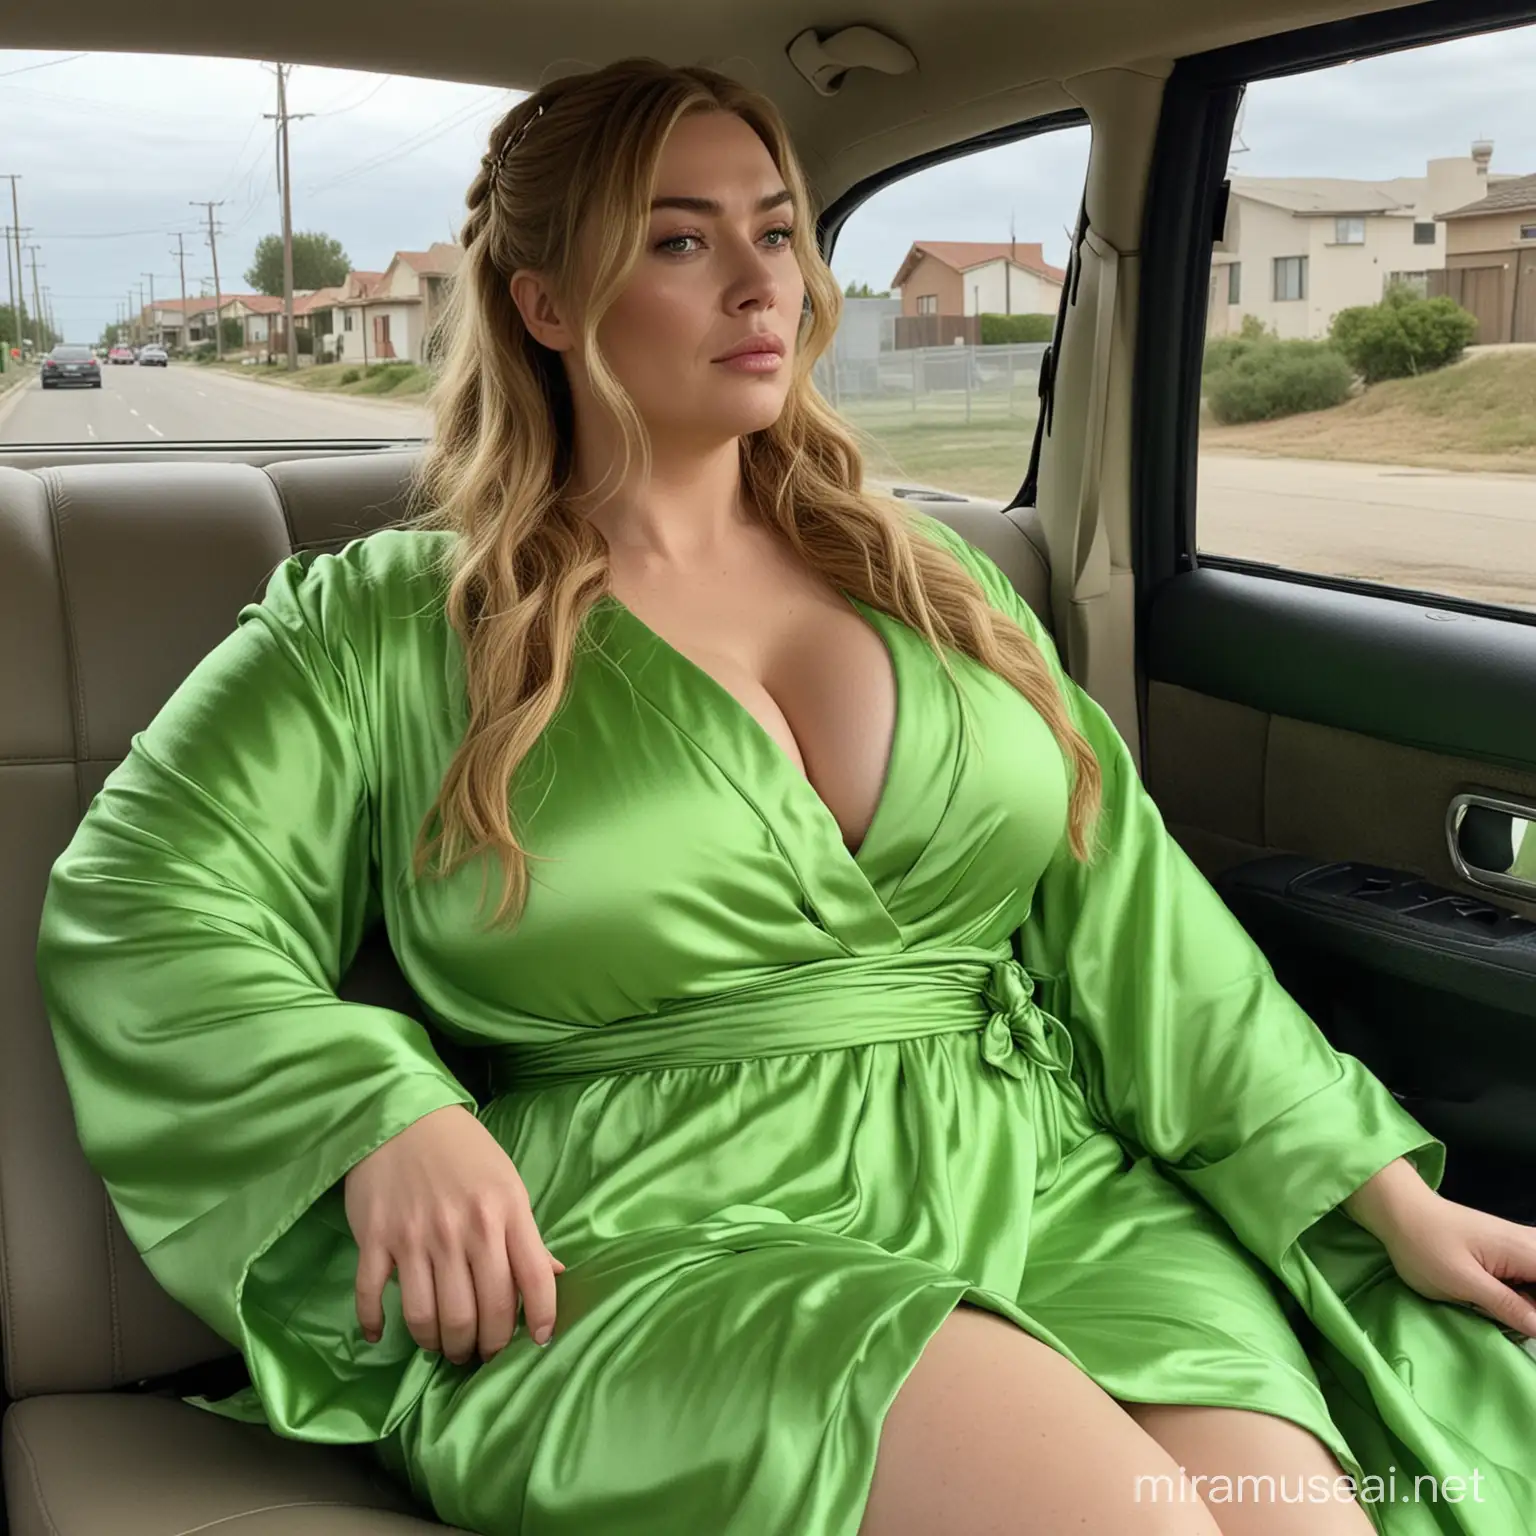 cersei lannister in a neon green silk robe, hair in long pigtails, in the back seat of a car, bbw, giant breast, massive cleavage